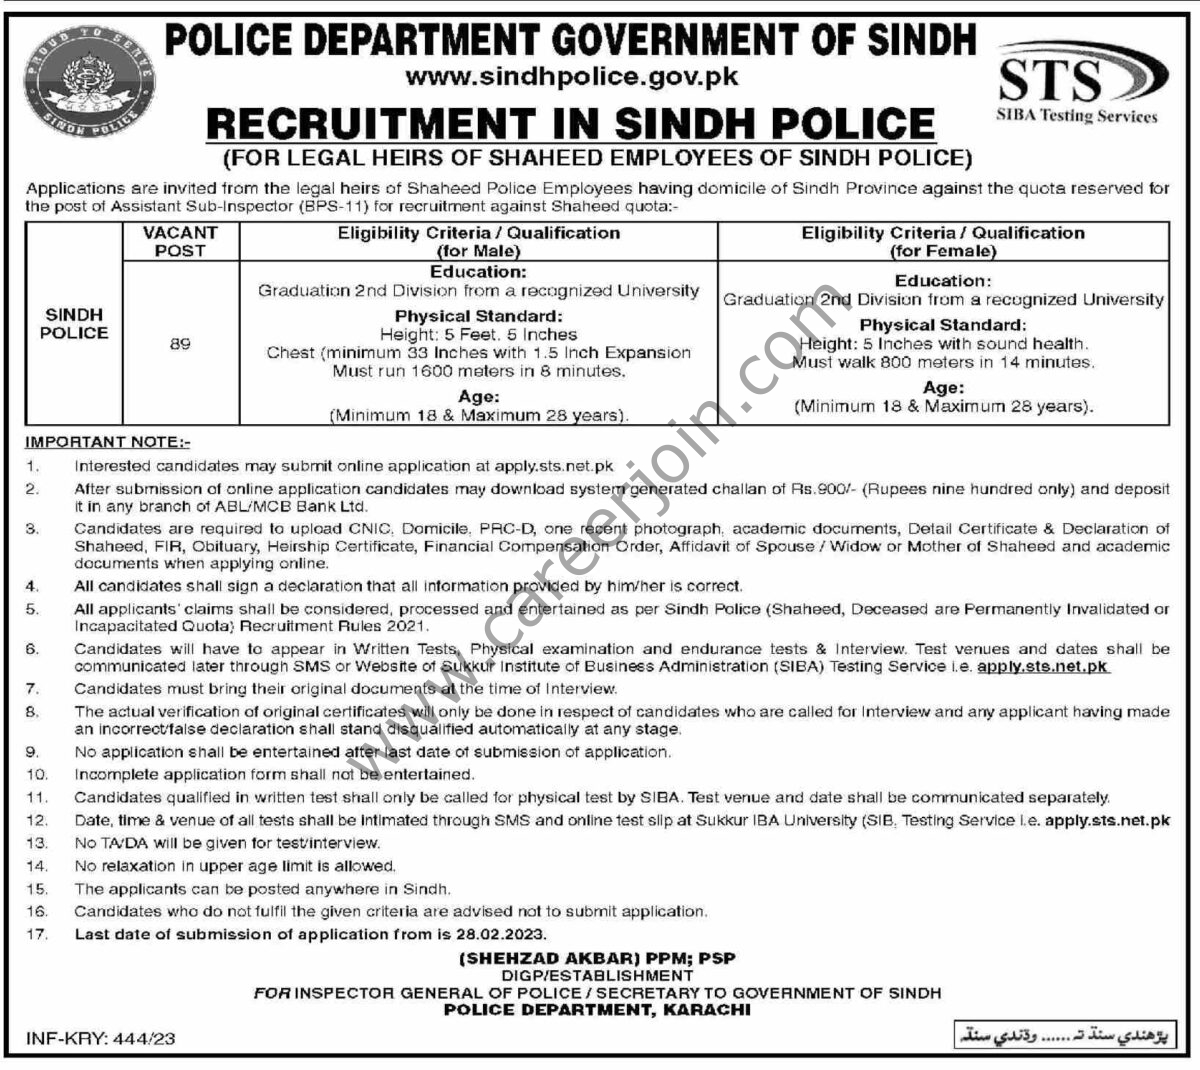 Police Department Govt of Sindh Jobs 09 February 2023 Dawn 03 11